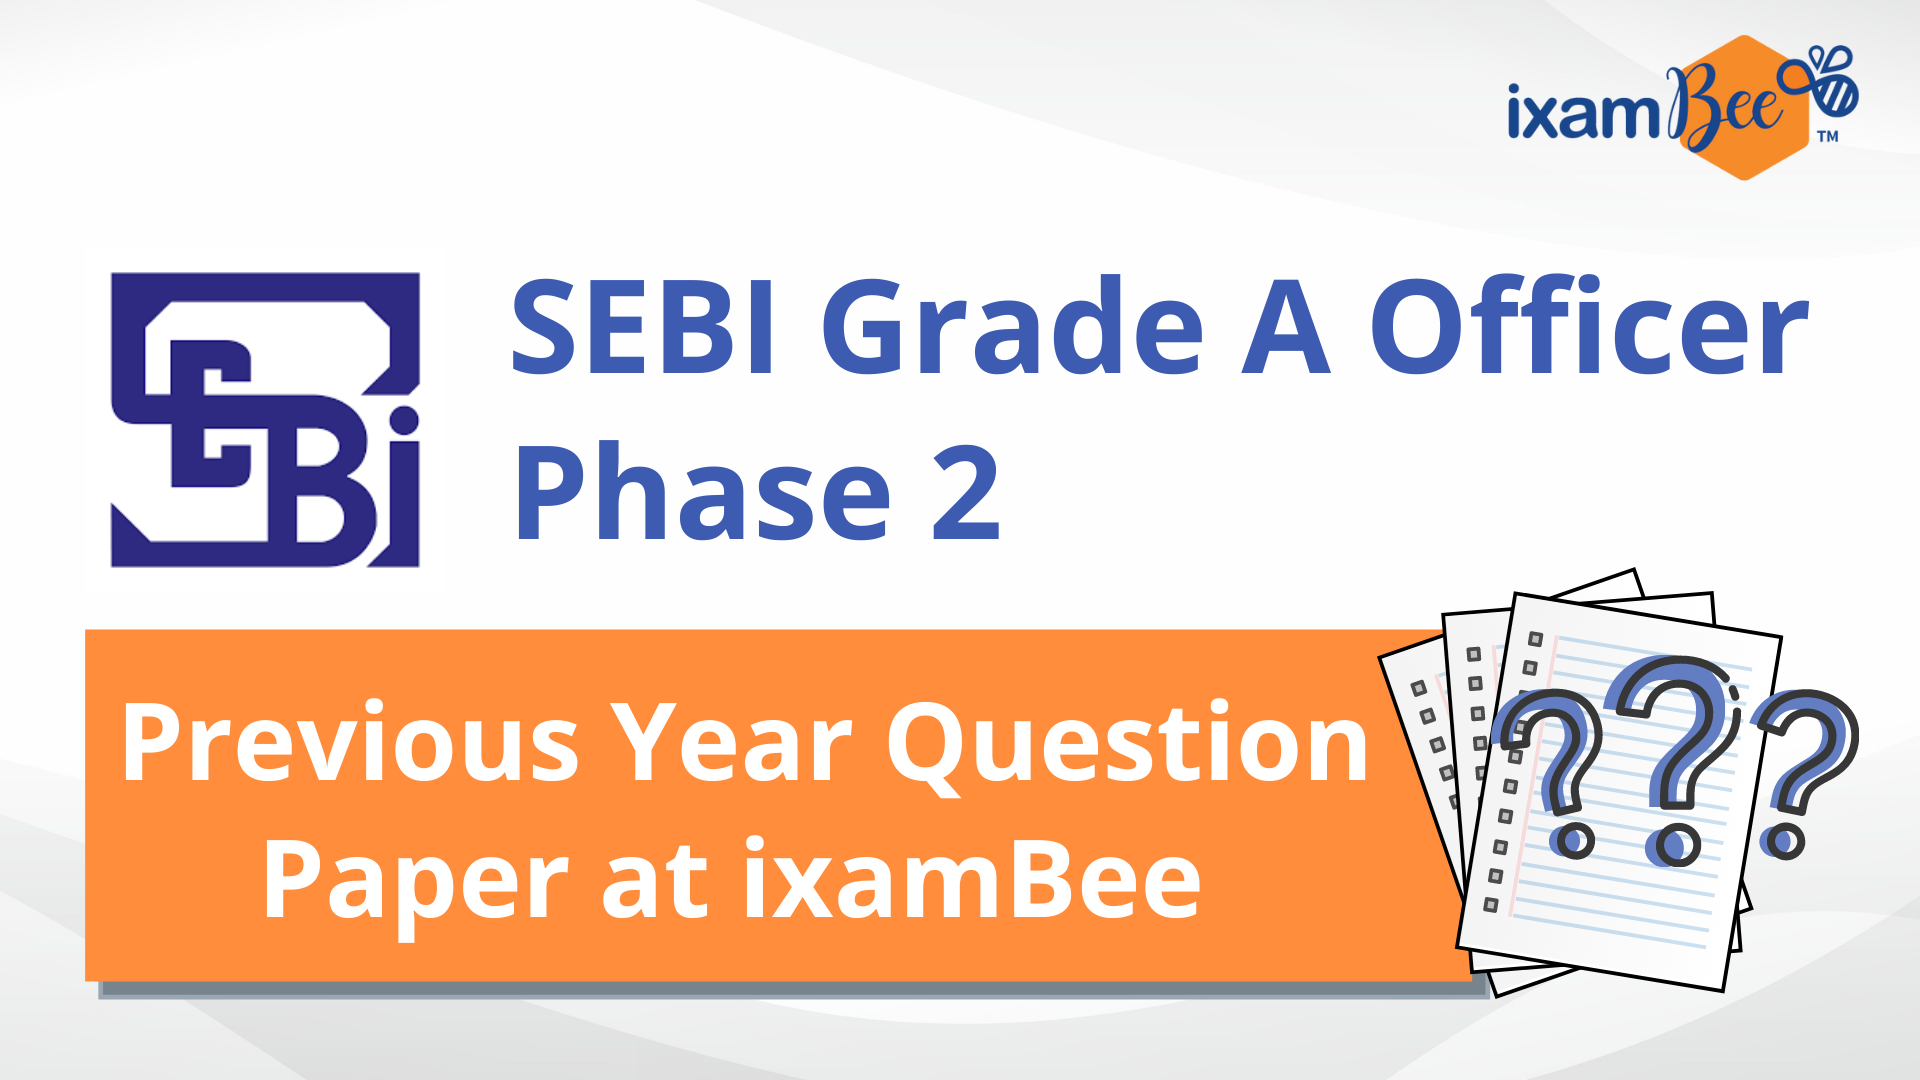 SEBI Grade A Officer Phase 2 Previous Year Paper and More